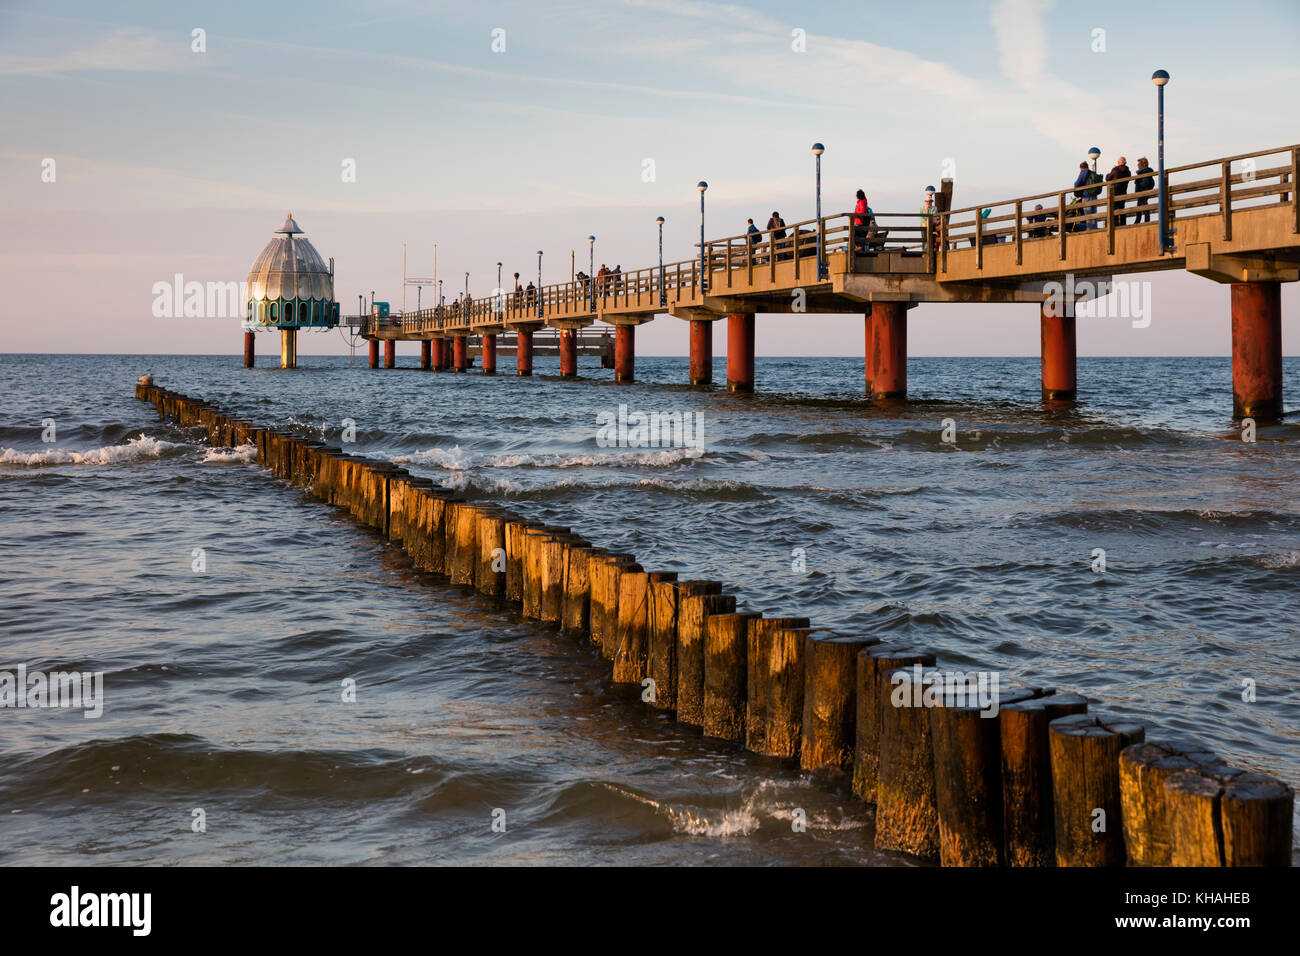 Zingst seebrucke - hi-res stock photography Alamy and images